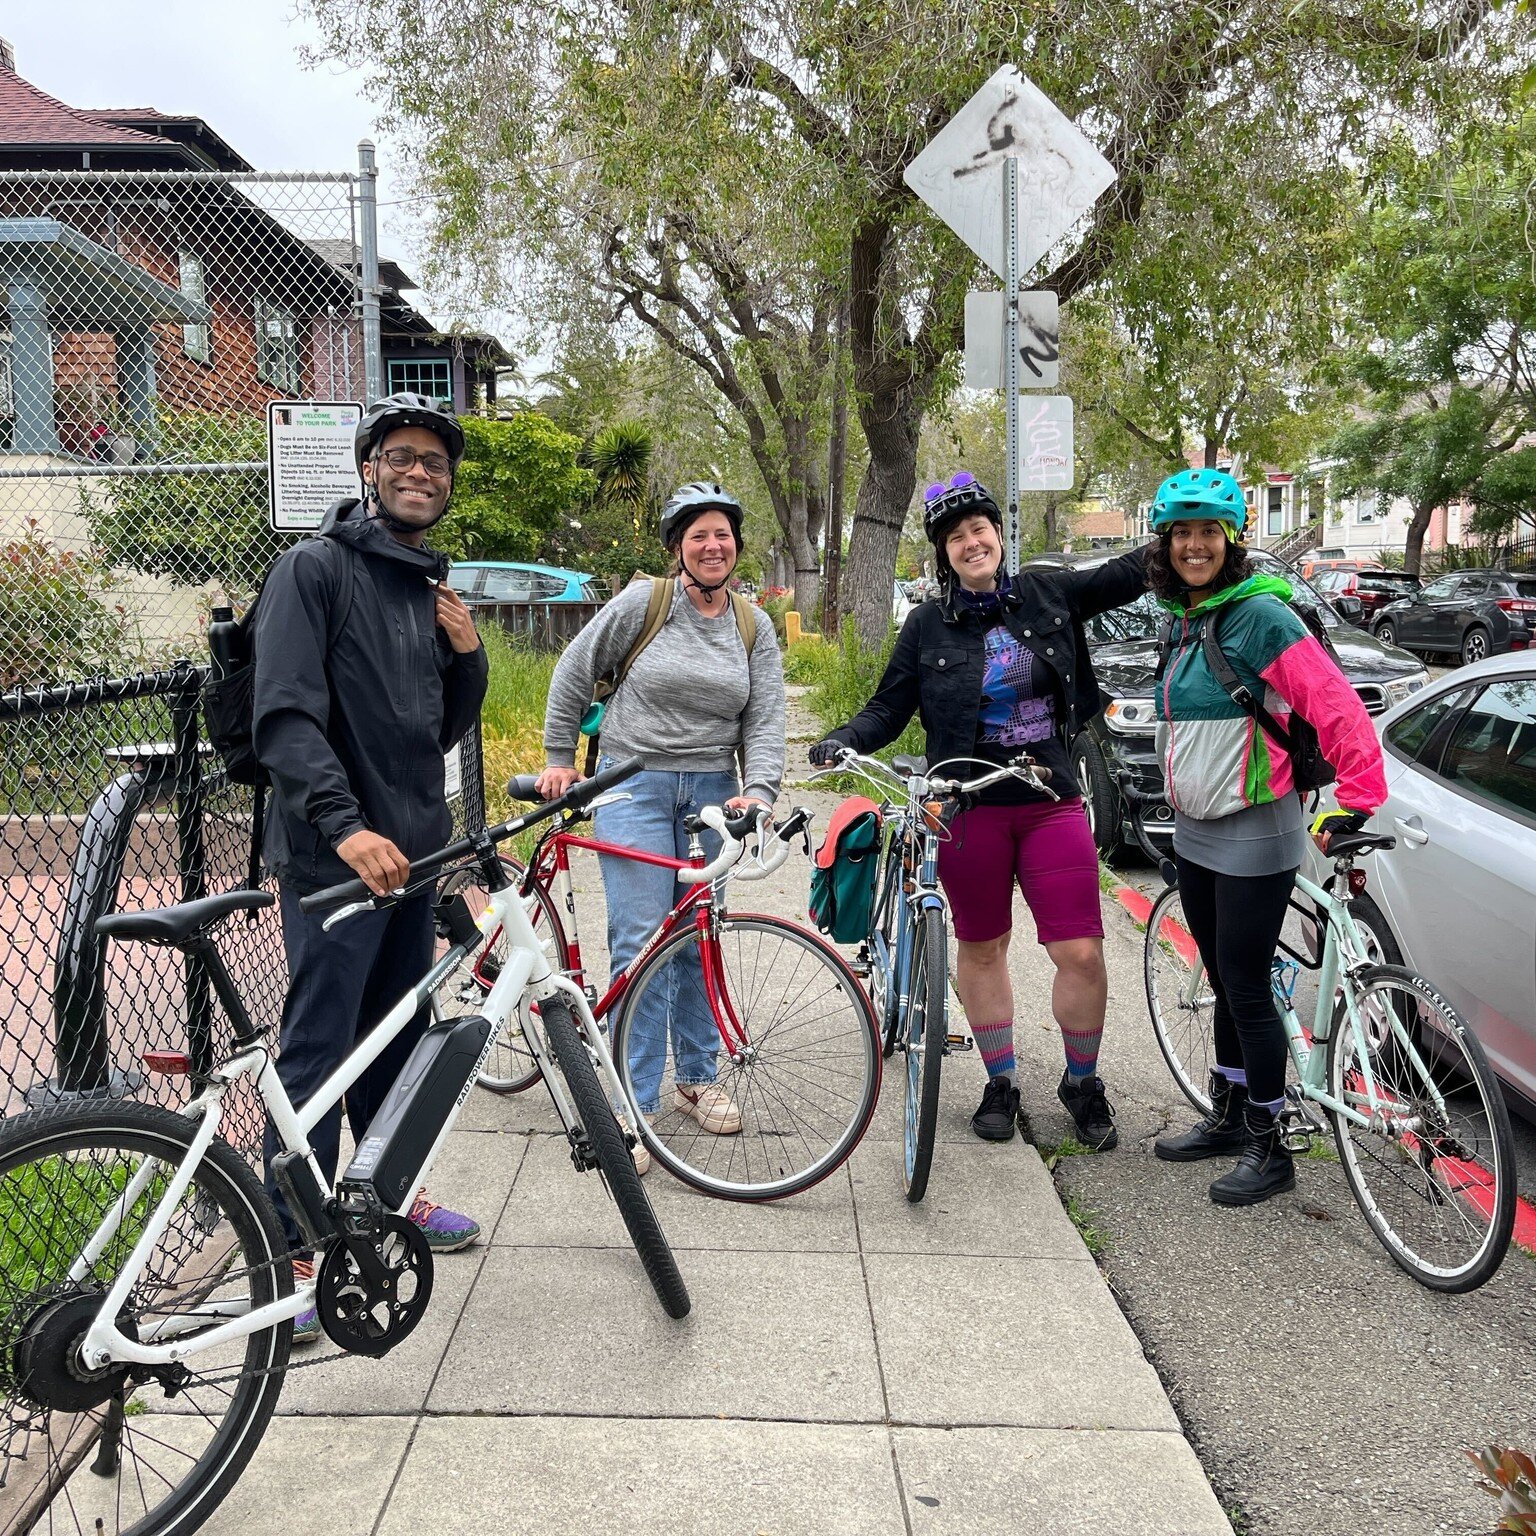 Happy Bike to Work or Wherever Day! This morning, several team members at our Berkeley office rode to work together as part of this Bay Area celebration, even stopping by one of the @bikeeastbay Energizer Stations for coffee and swag. #BTWD is not on